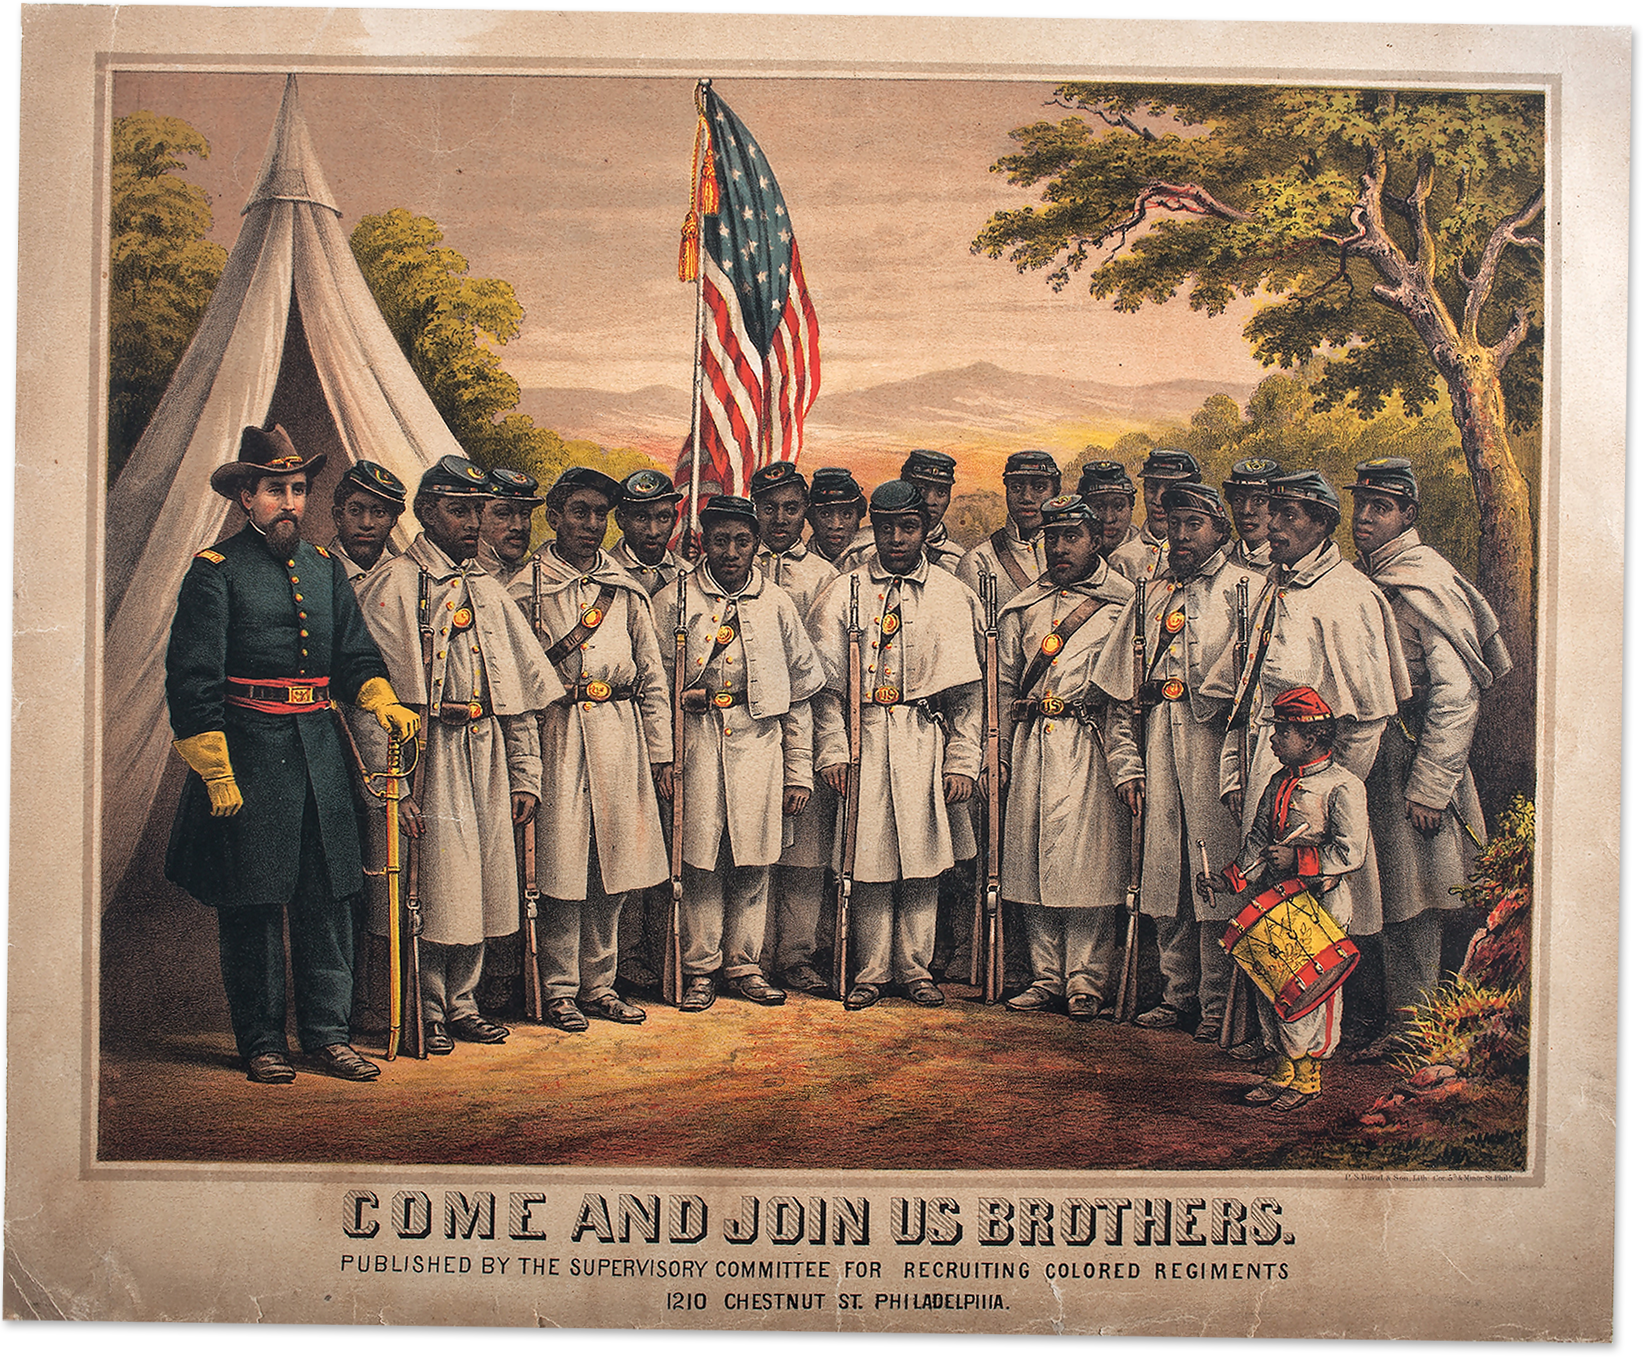 Union Army recruitment poster seeking Black soldiers to be trained at Camp William Penn.